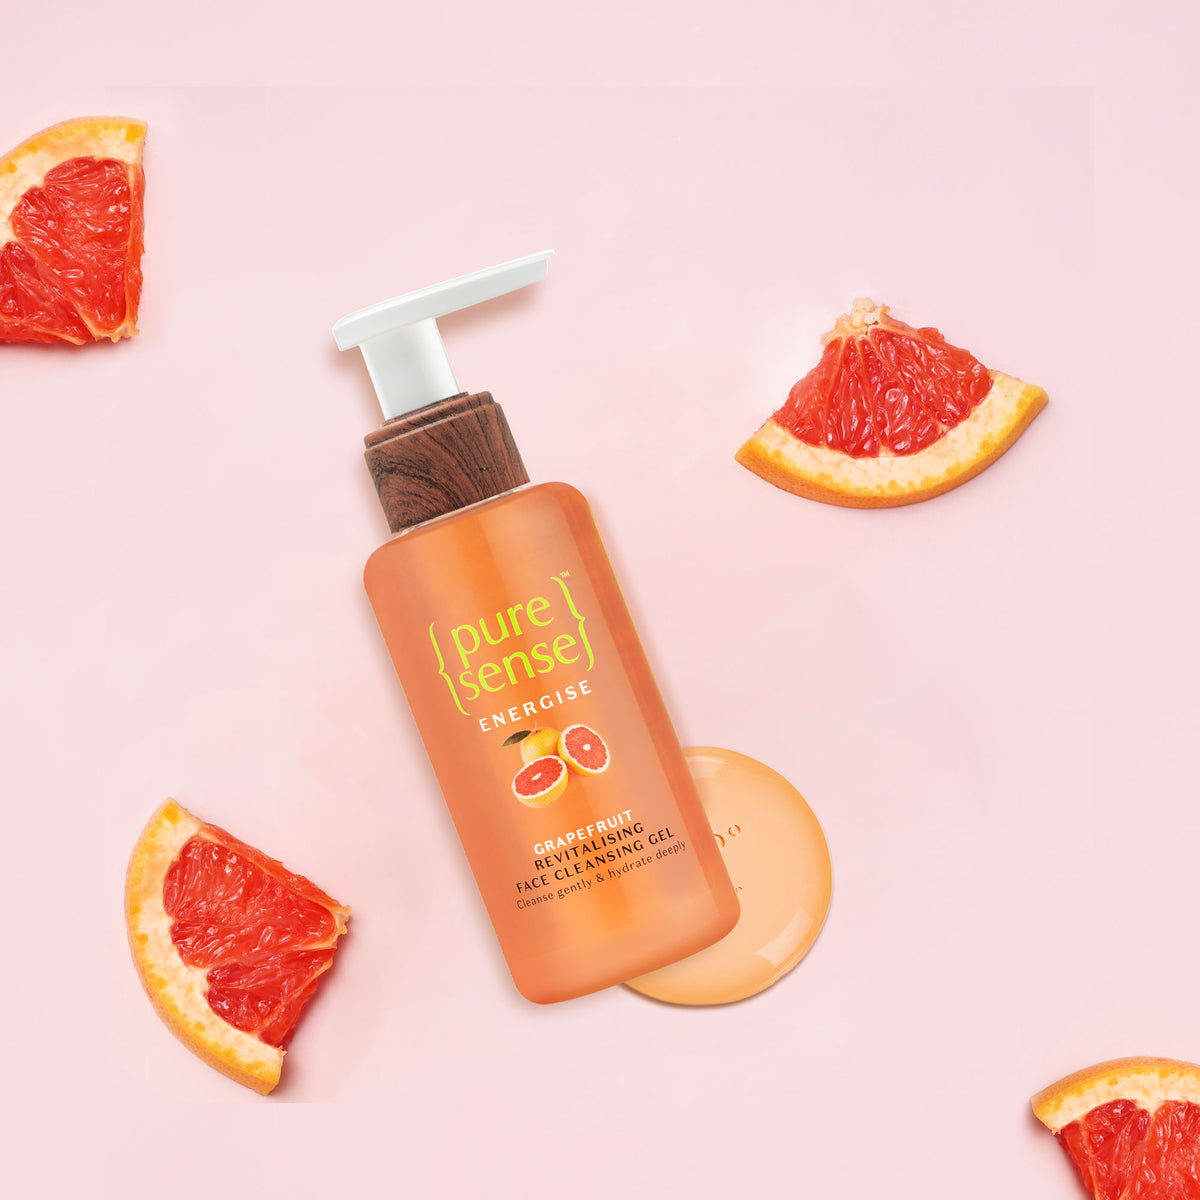 Energise Grapefruit Revitalising Face Cleansing Gel (Face Wash) | From the makers of Parachute Advansed | 100ml